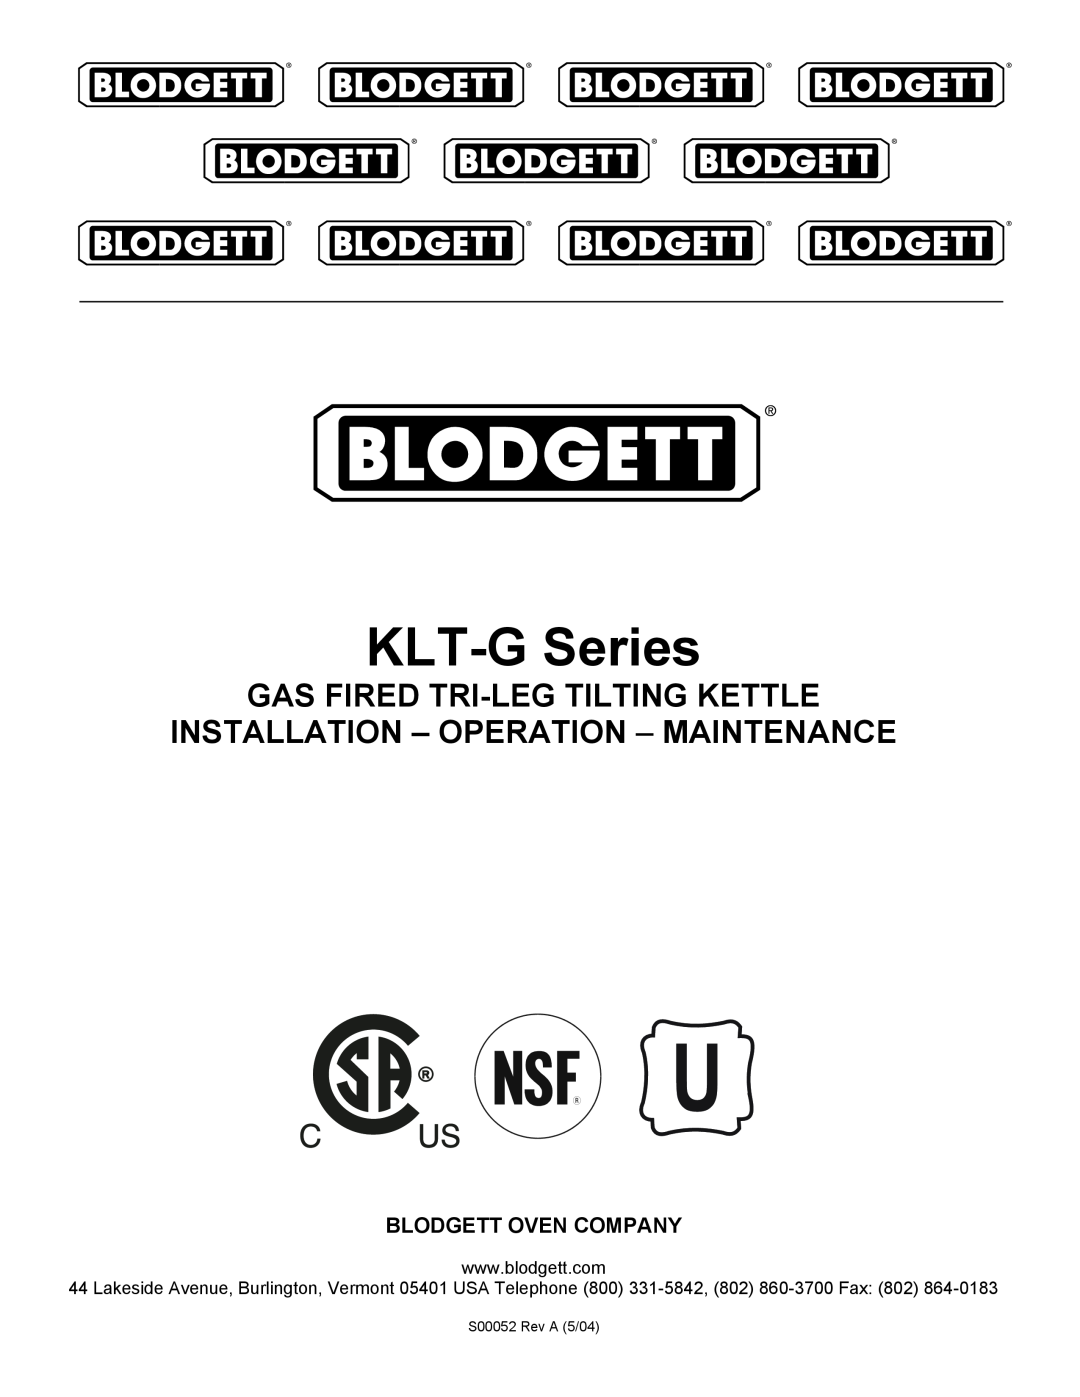 Blodgett KLT-G Series manual Important Notes For Installation And Operation, Gas Fired Tri-Leg Tilting Kettle 